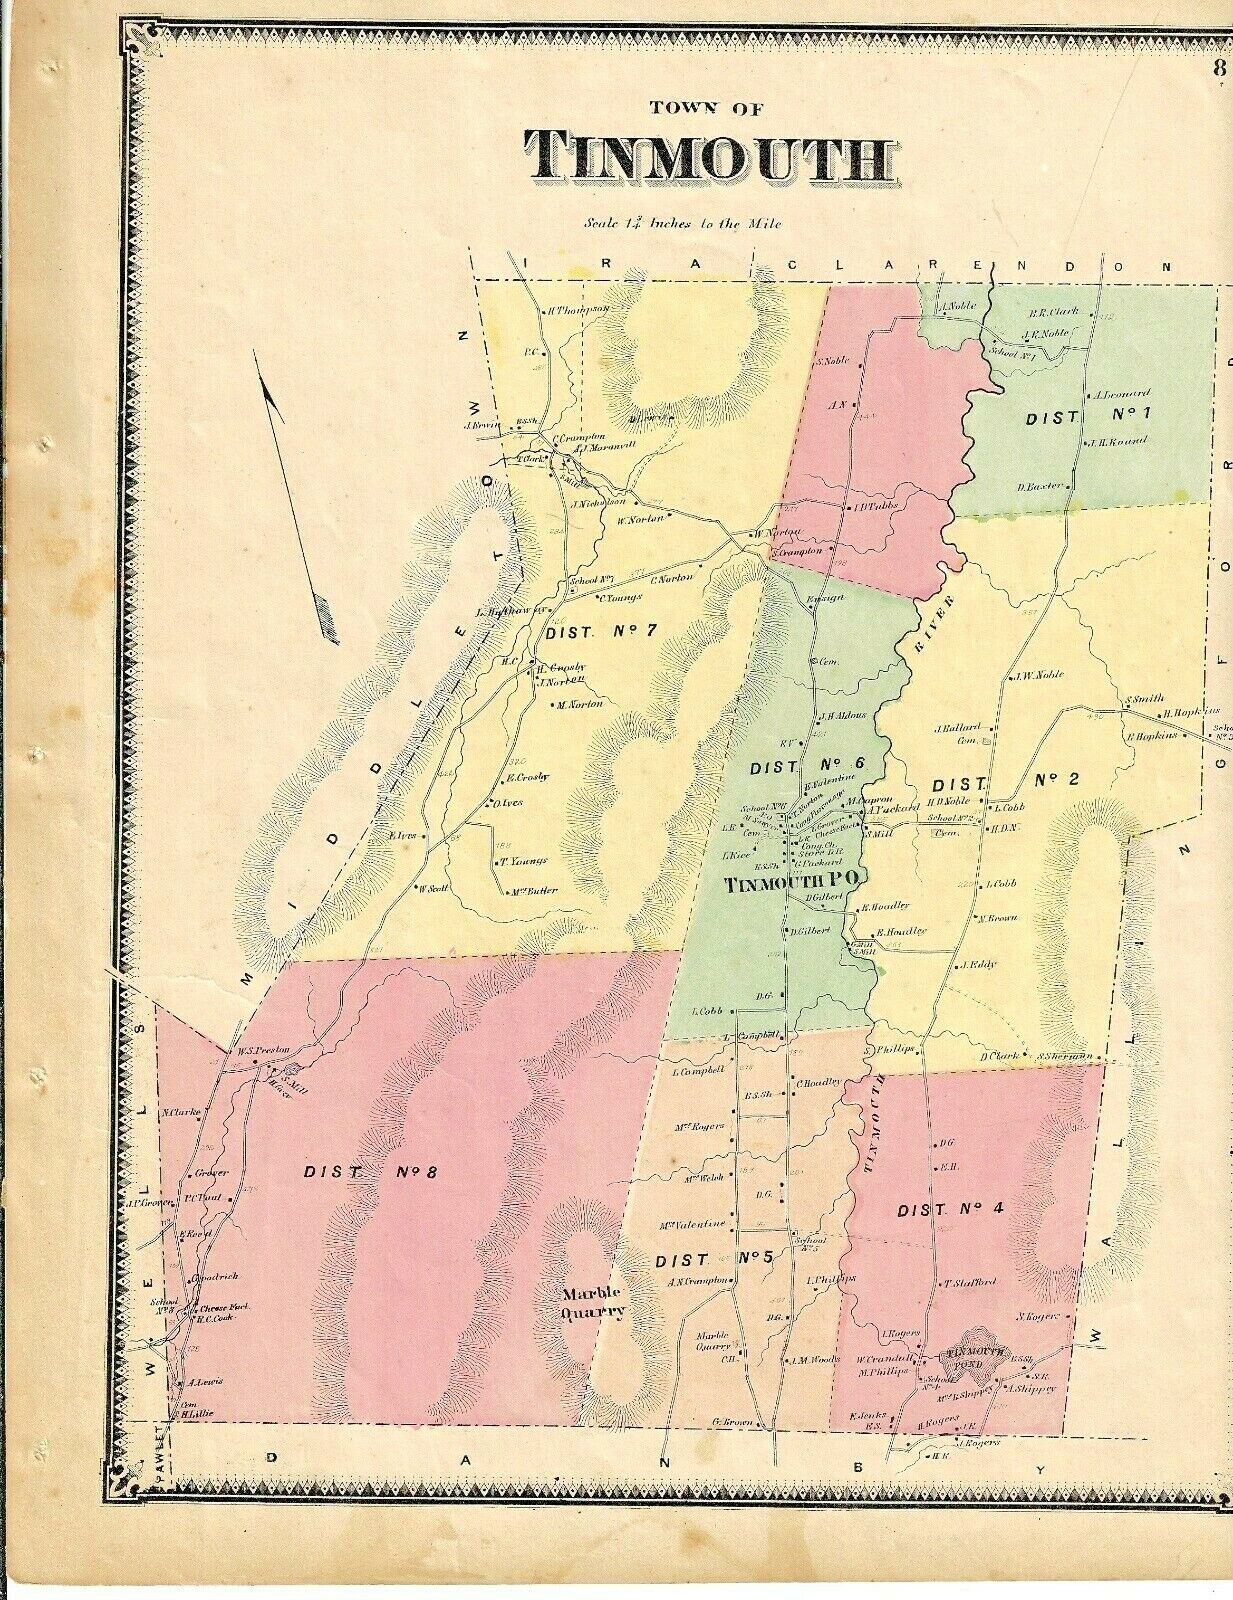 TINMOUTH, VT., VINTAGE HAND COLORED 1869 MAP.  NOT A REPRINT